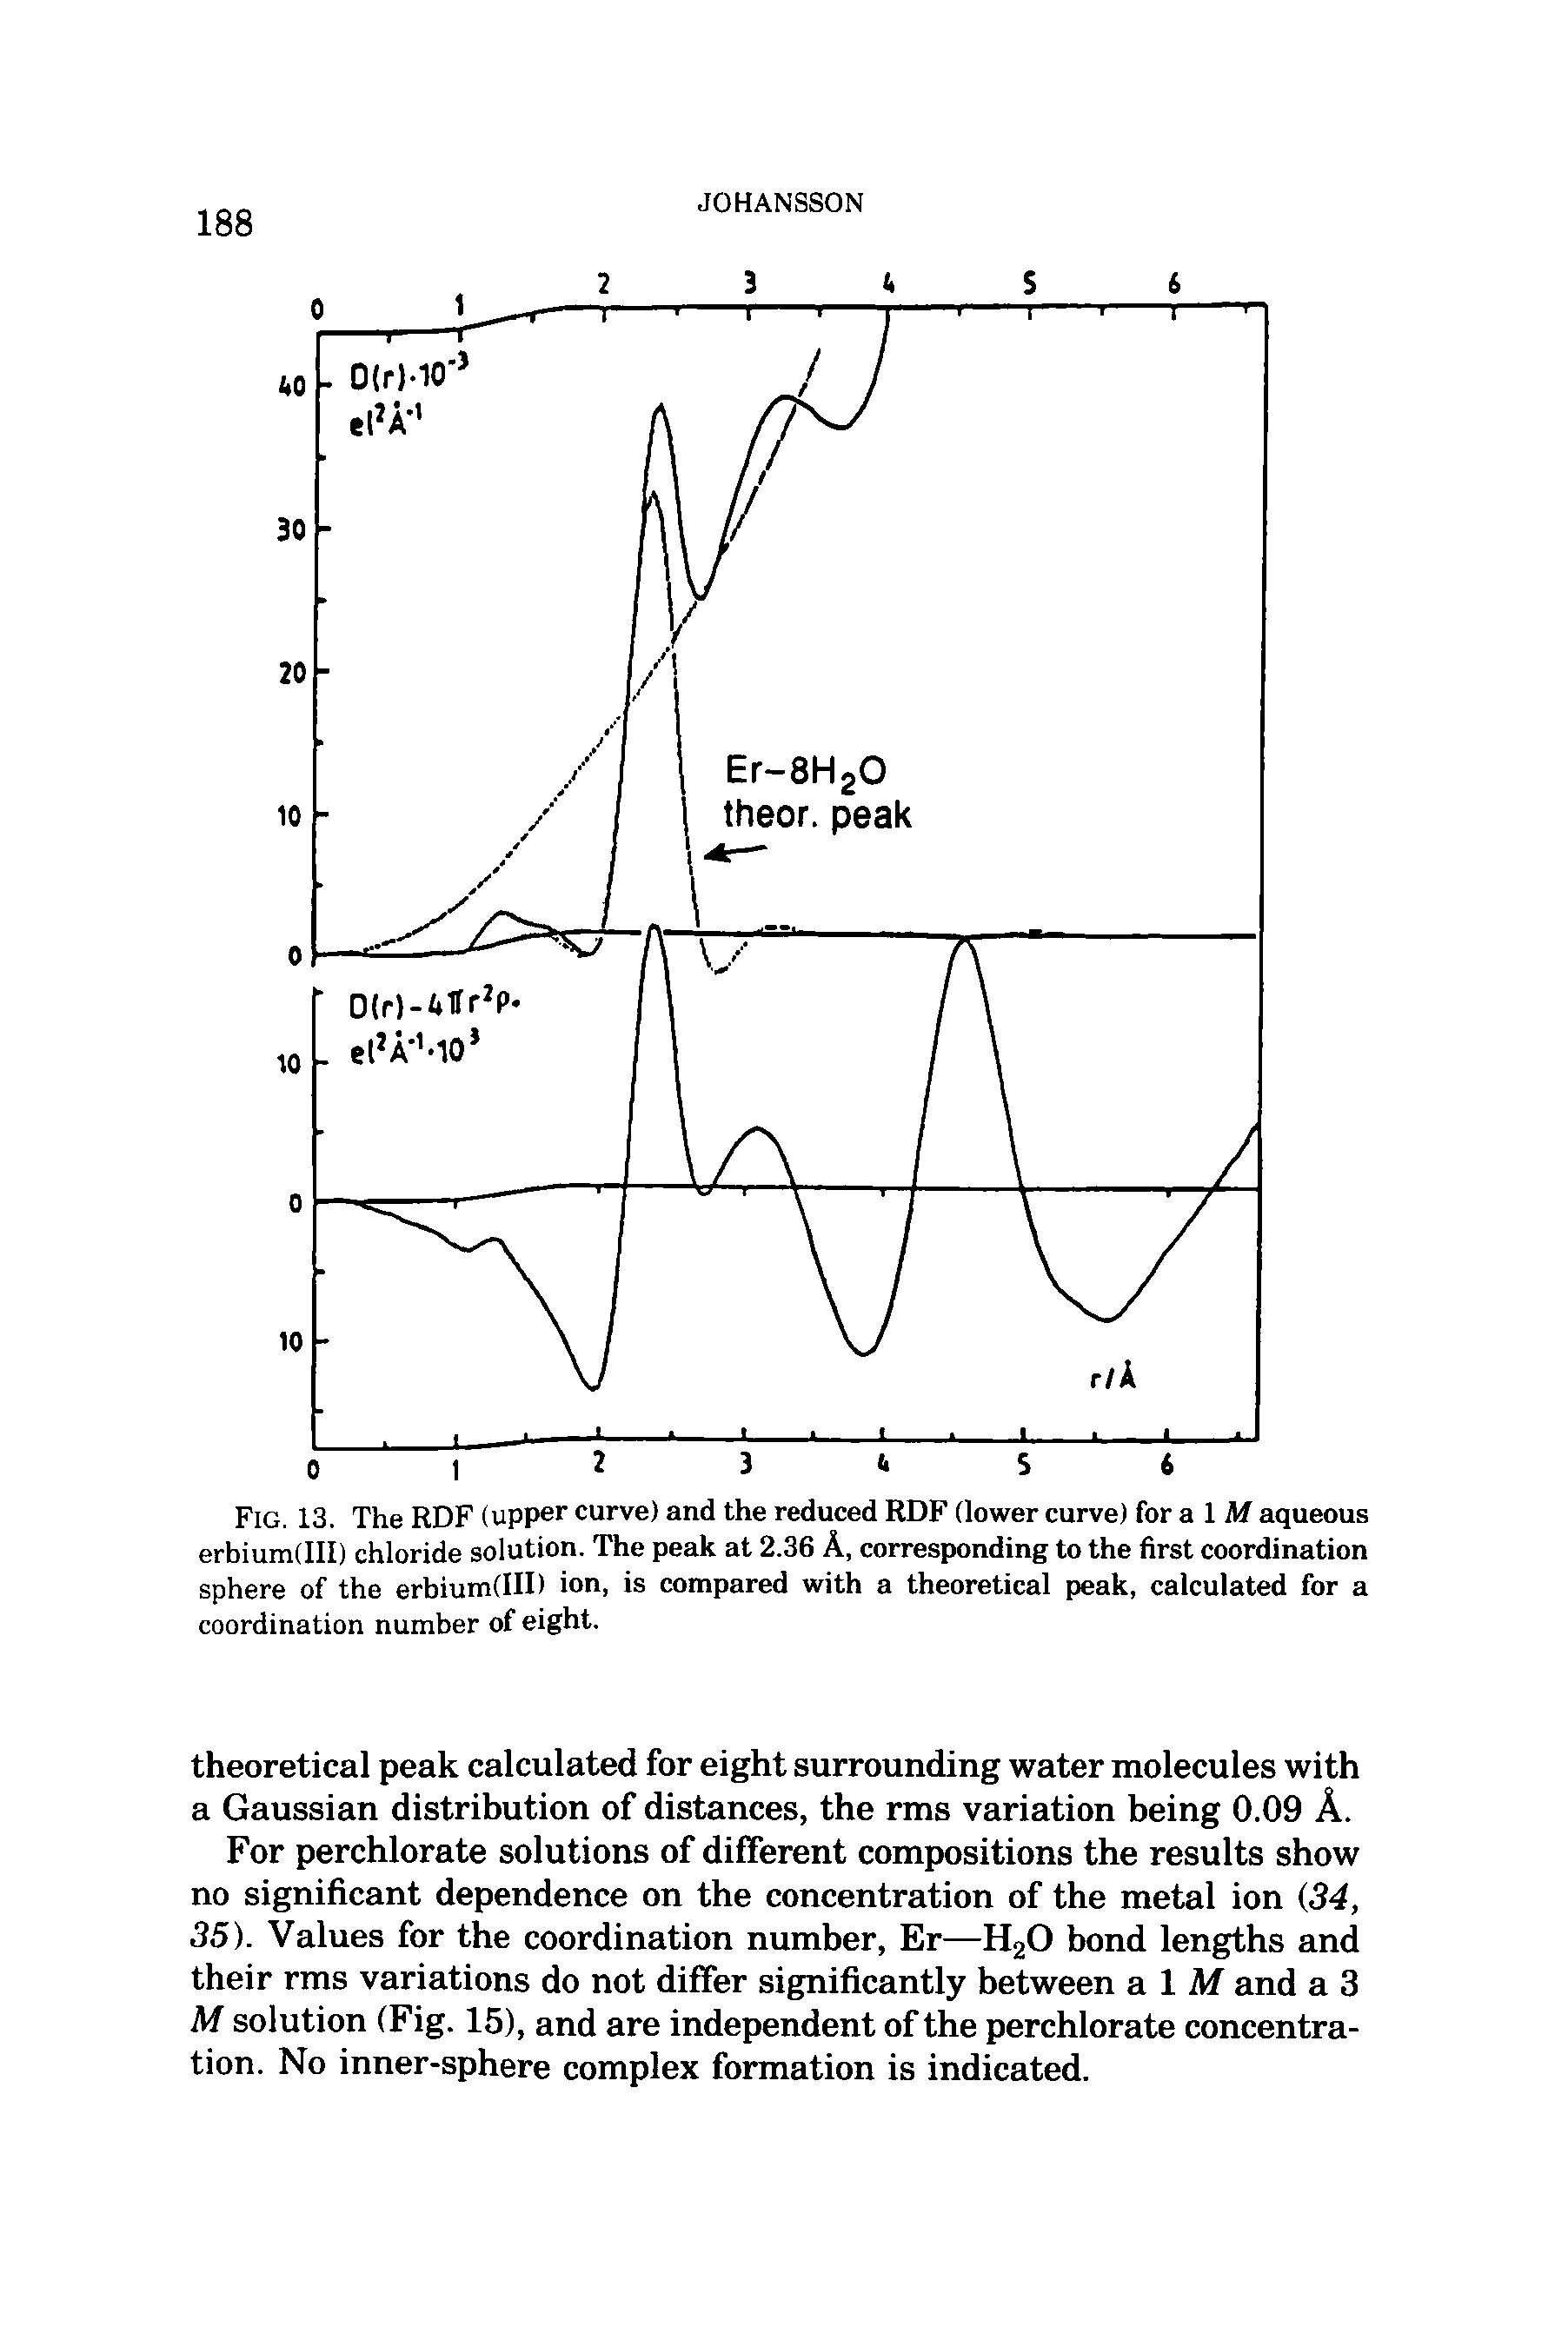 Fig. 13. The RDF (upper curve) and the reduced RDF (lower curve) for a 1 M aqueous erbium(III) chloride solution. The peak at 2.36 A, corresponding to the first coordination sphere of the erbium(III) ion, is compared with a theoretical peak, calculated for a coordination number of eight.